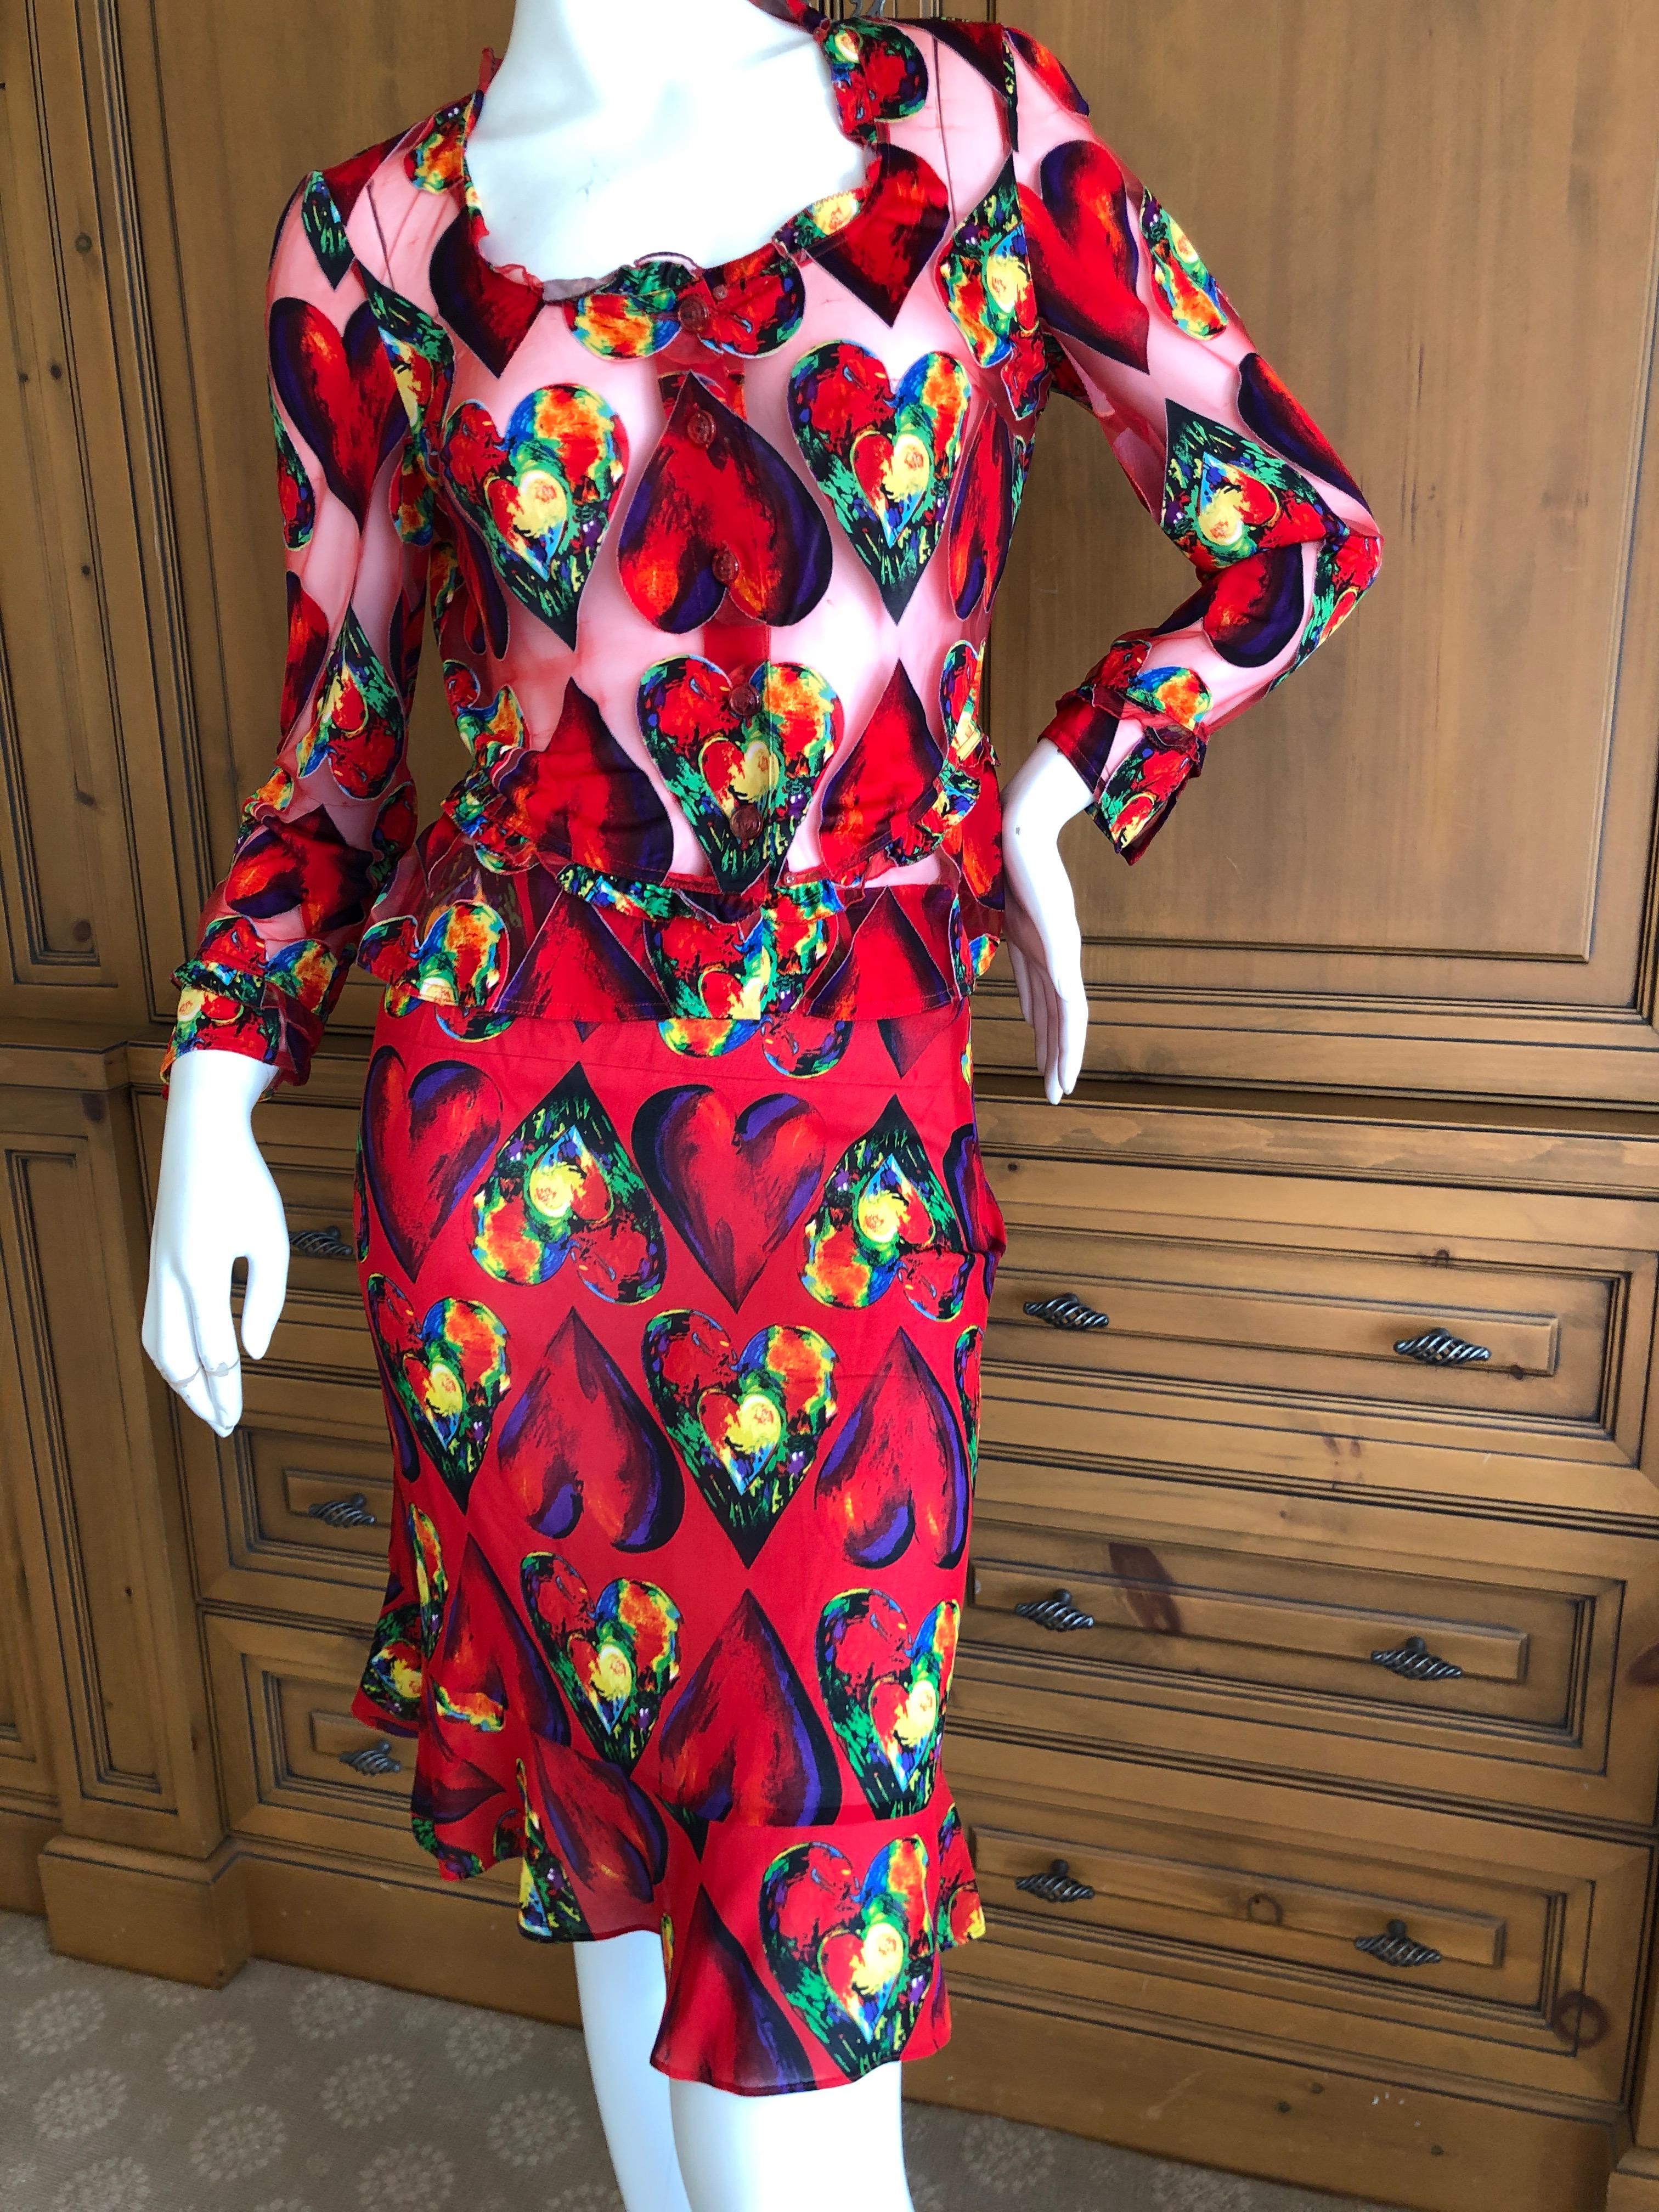 Women's Gianni Versace Couture Spring 1997 Jim Dine Heart Print Sheer Skirt Suit For Sale